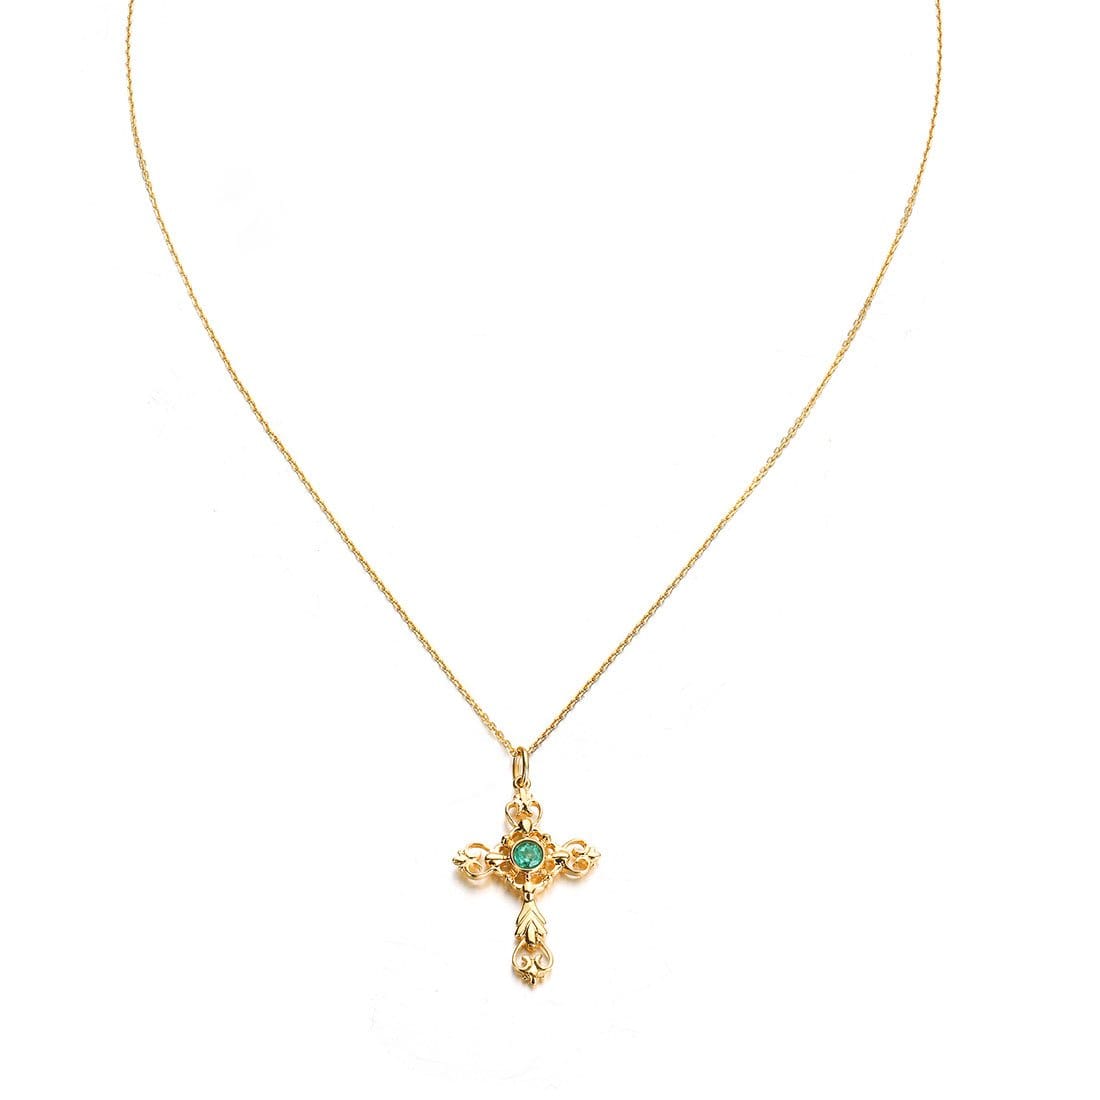 Fanci "Esther" Cross Pendant 14k Yellow Gold Necklace Full